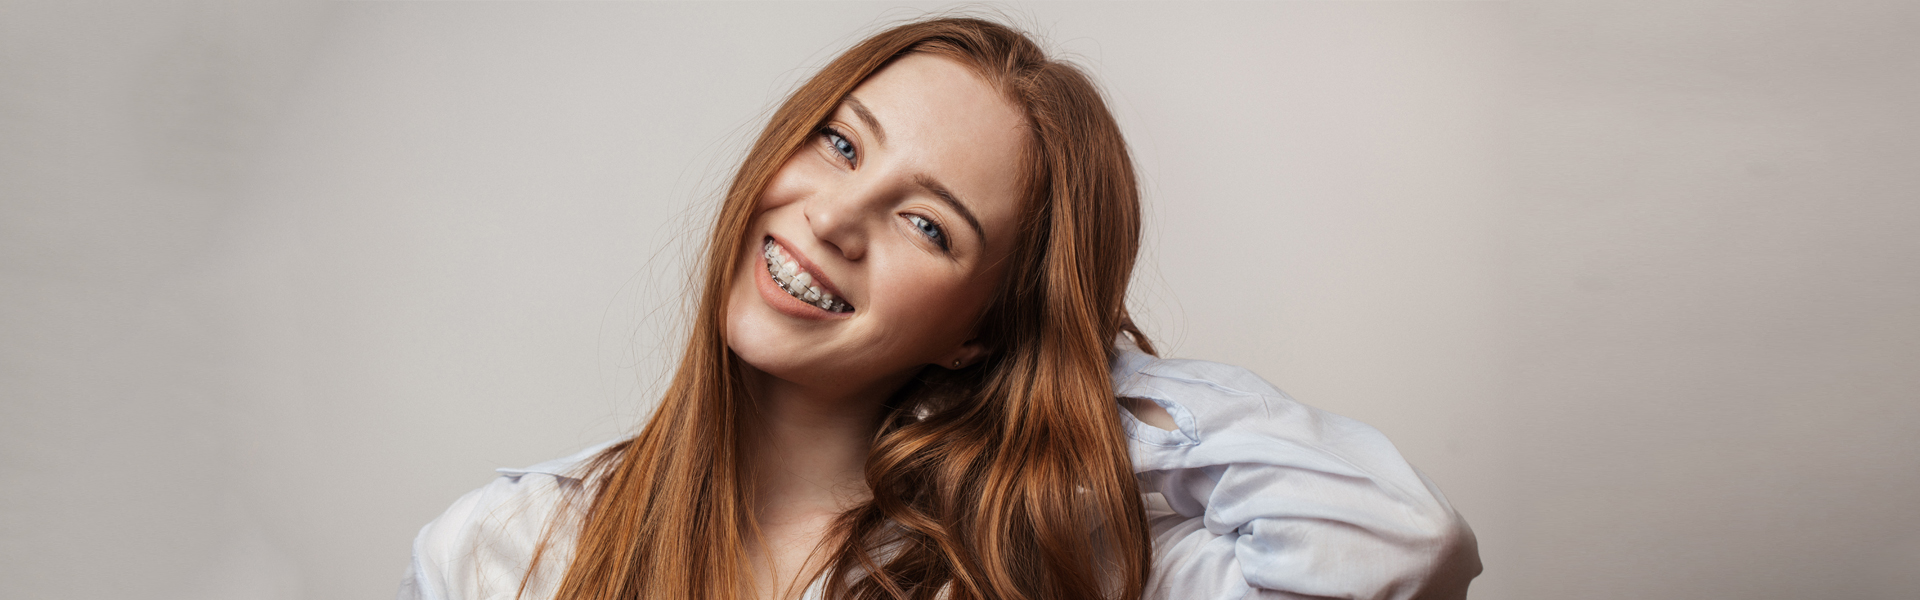 Traditional Braces: What You Need to Know